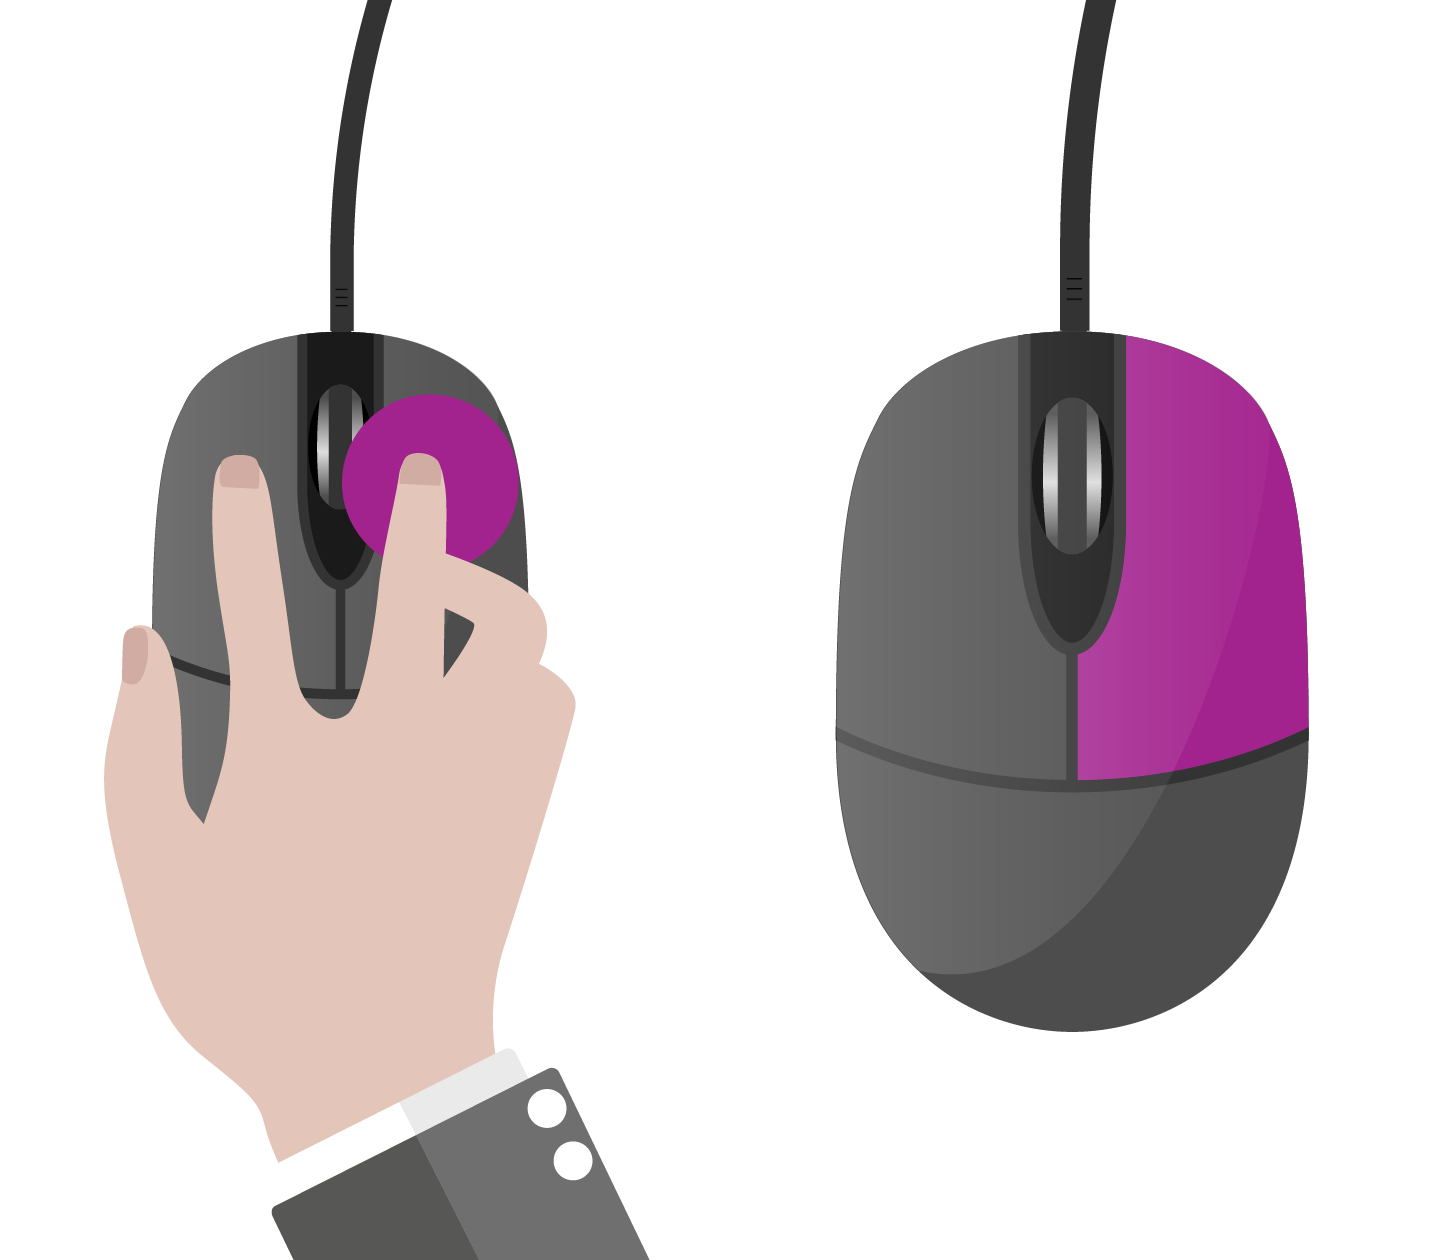 A right click on a mouse